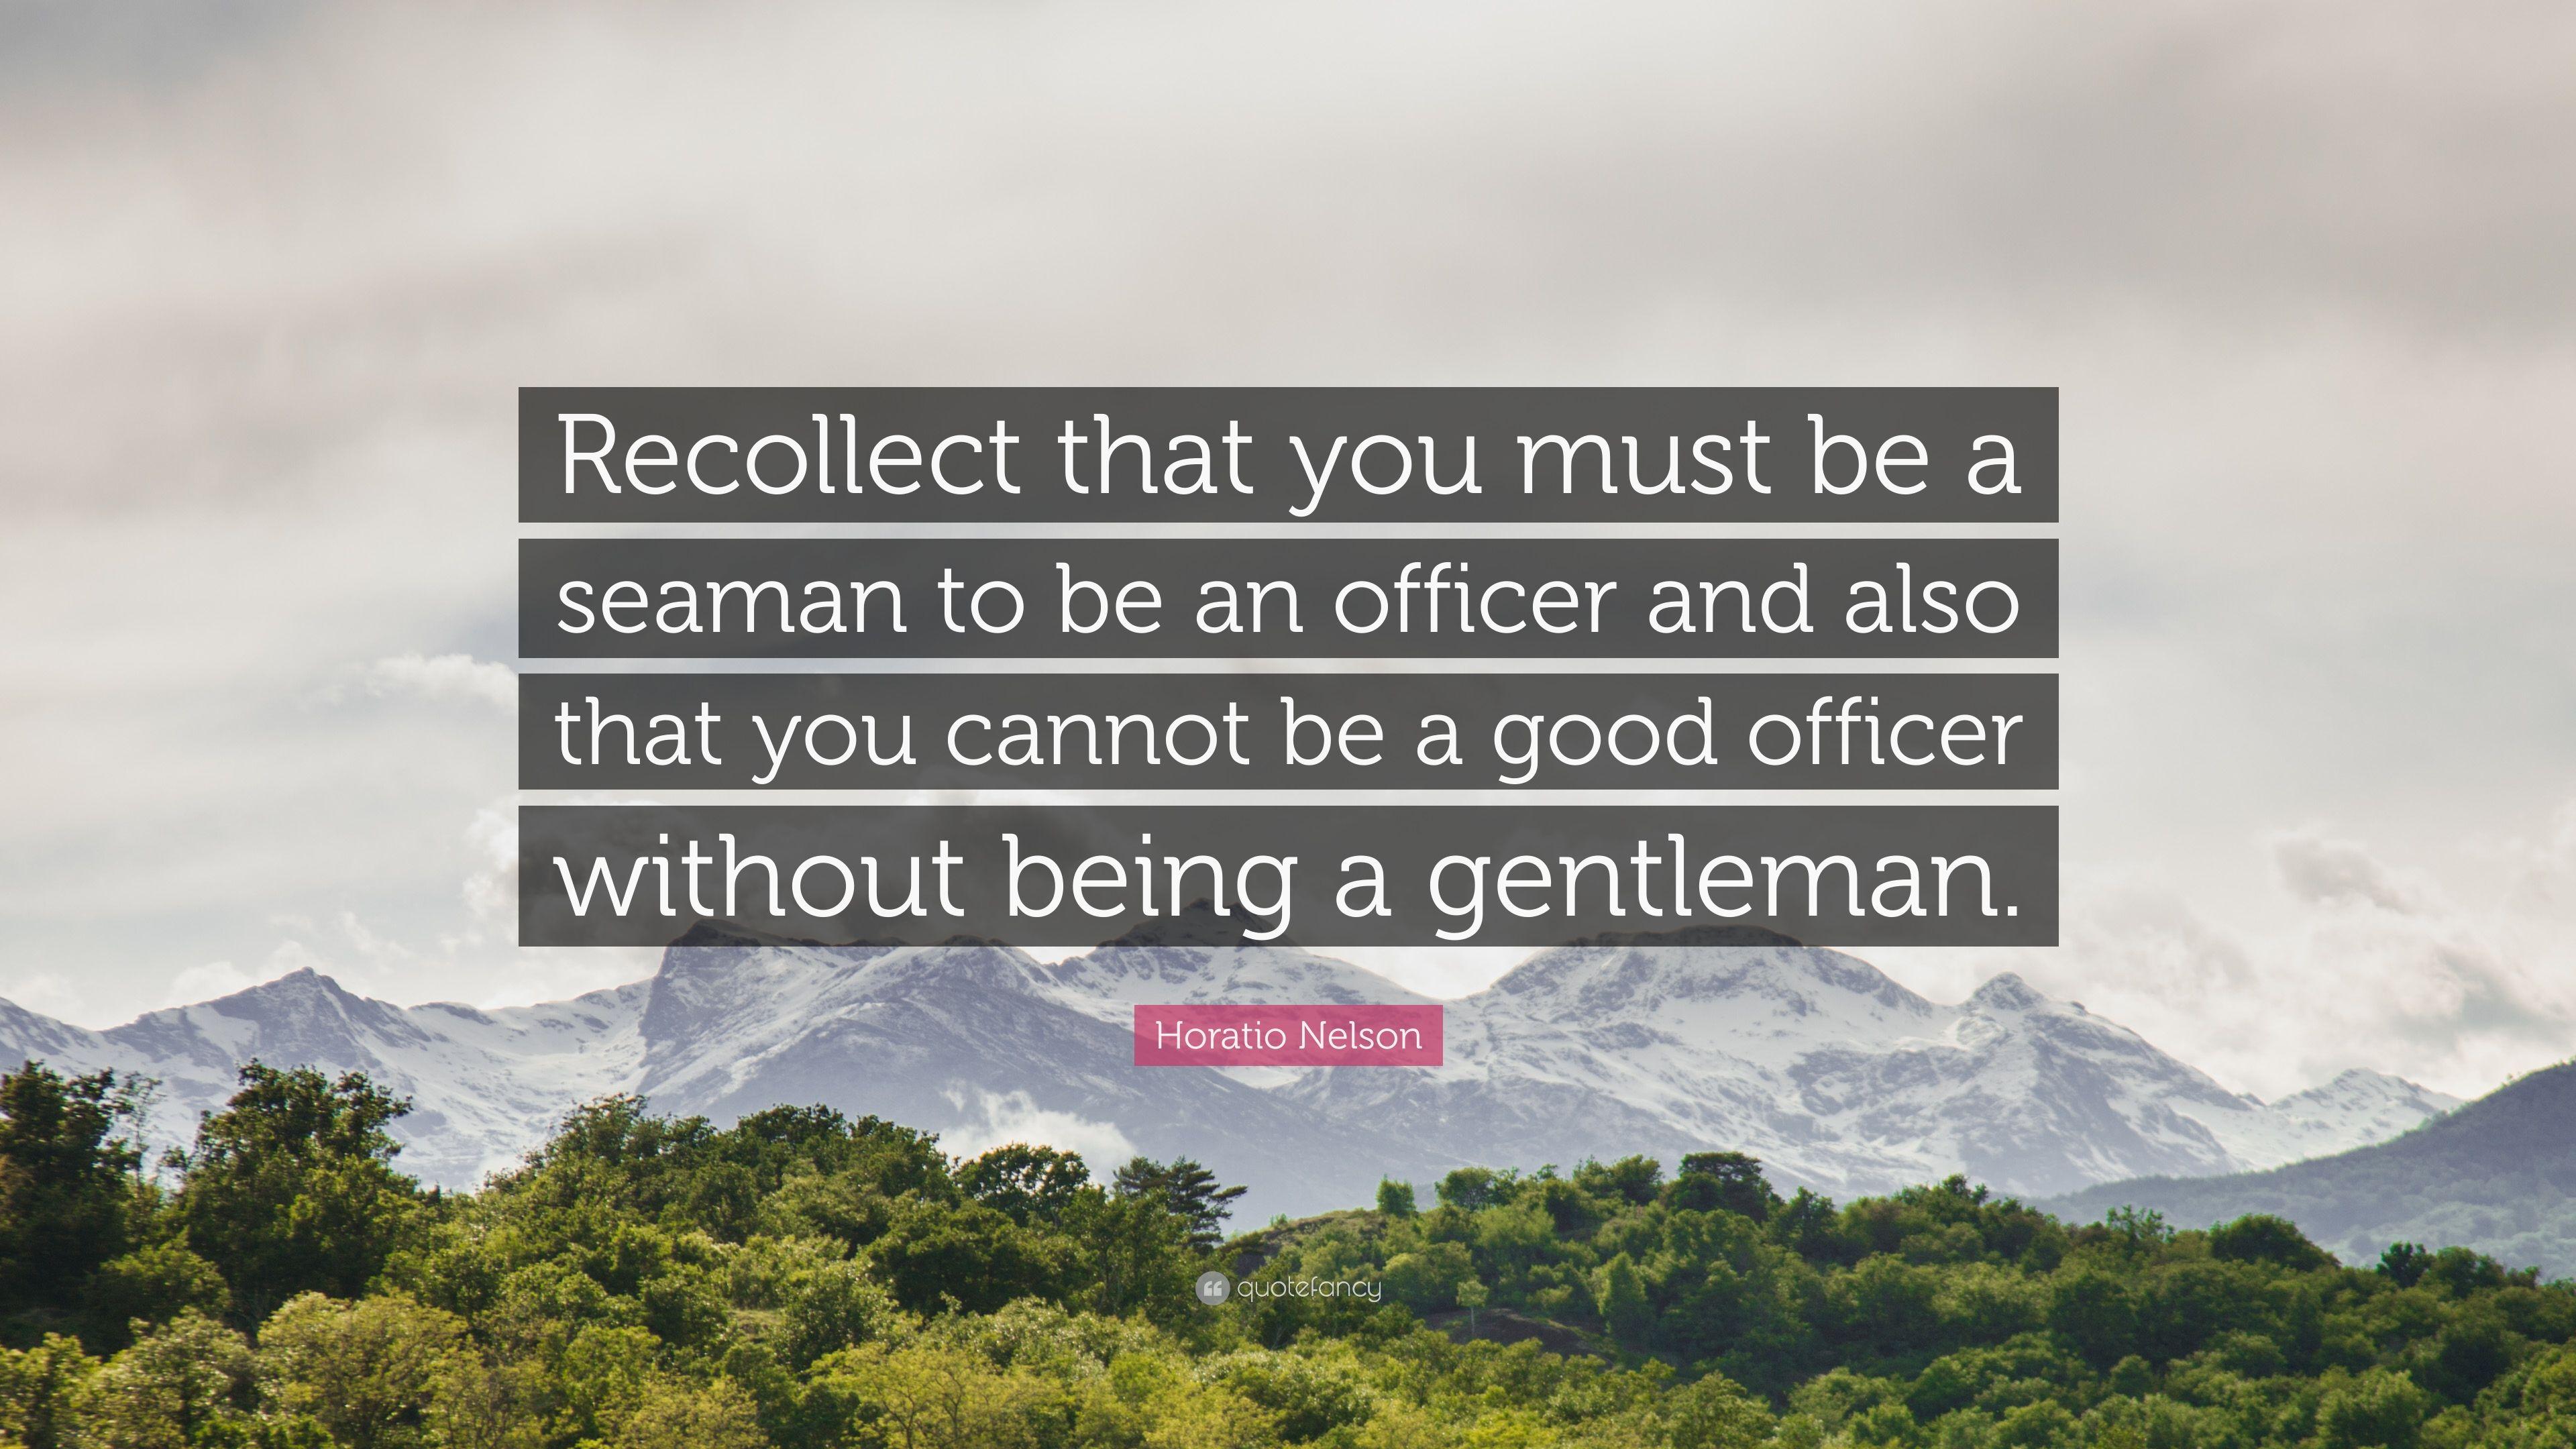 Horatio Nelson Quote: “Recollect that you must be a seaman to be